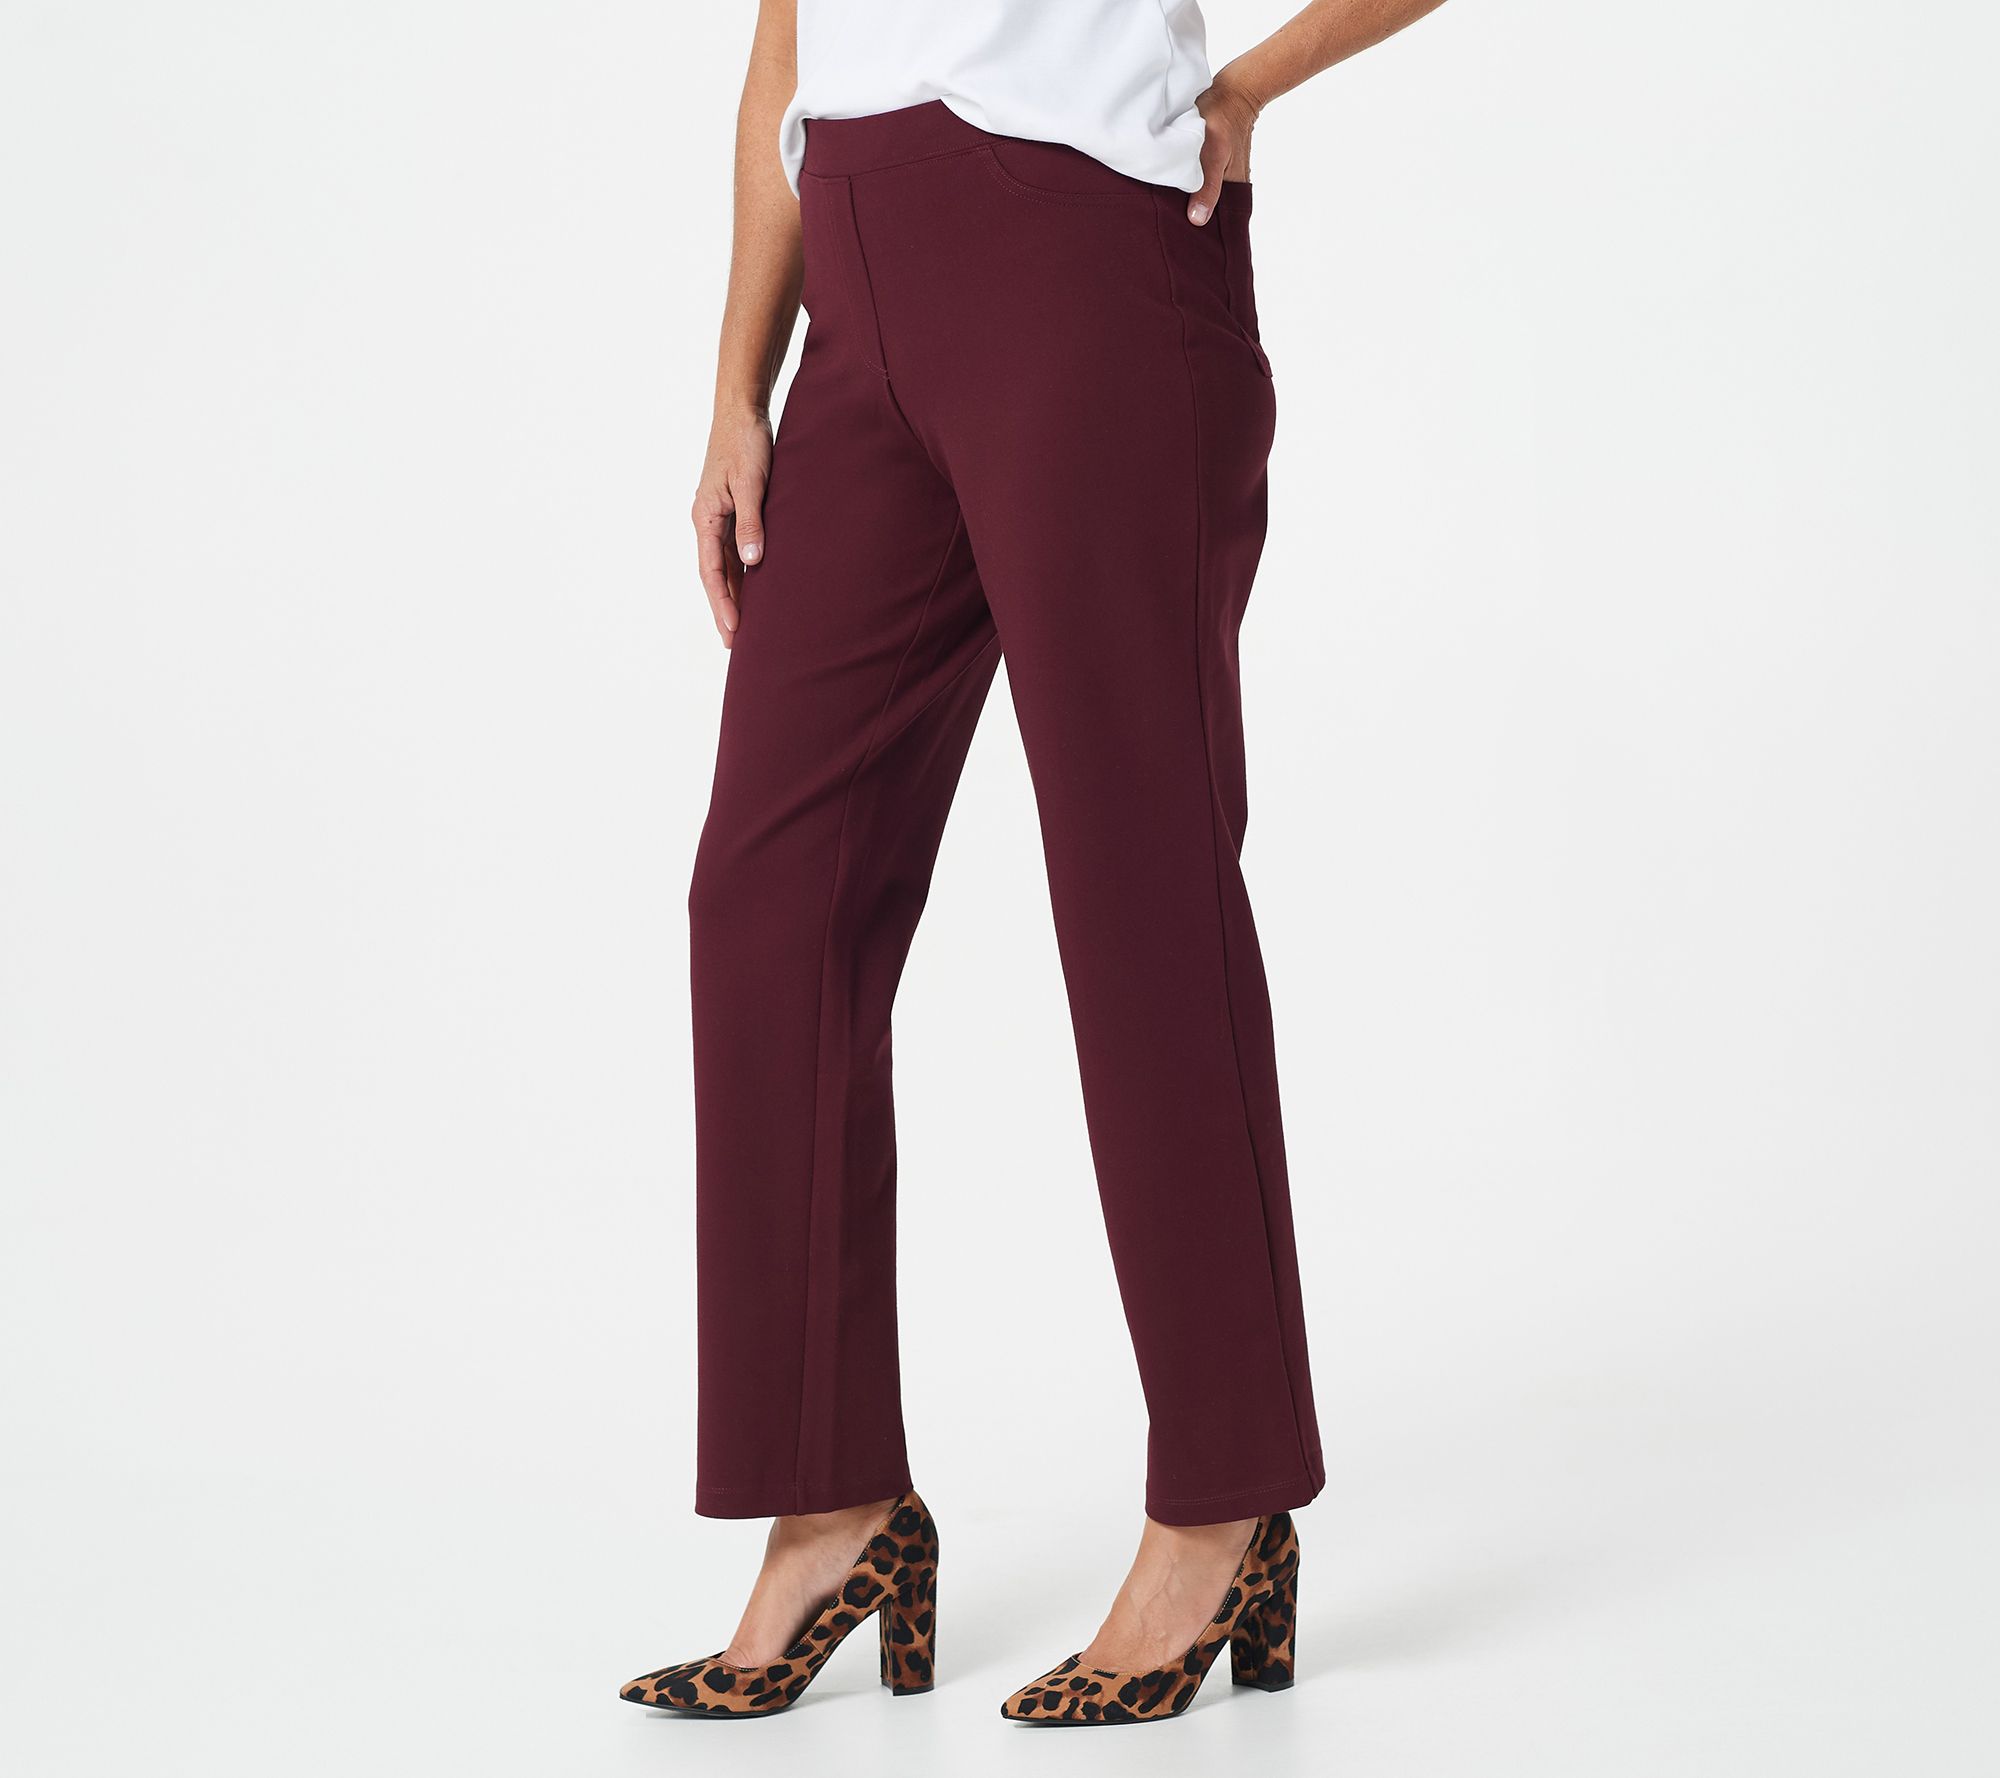 AnyBody Regular Pull-On All-Stretch Twill Pant with Pockets 